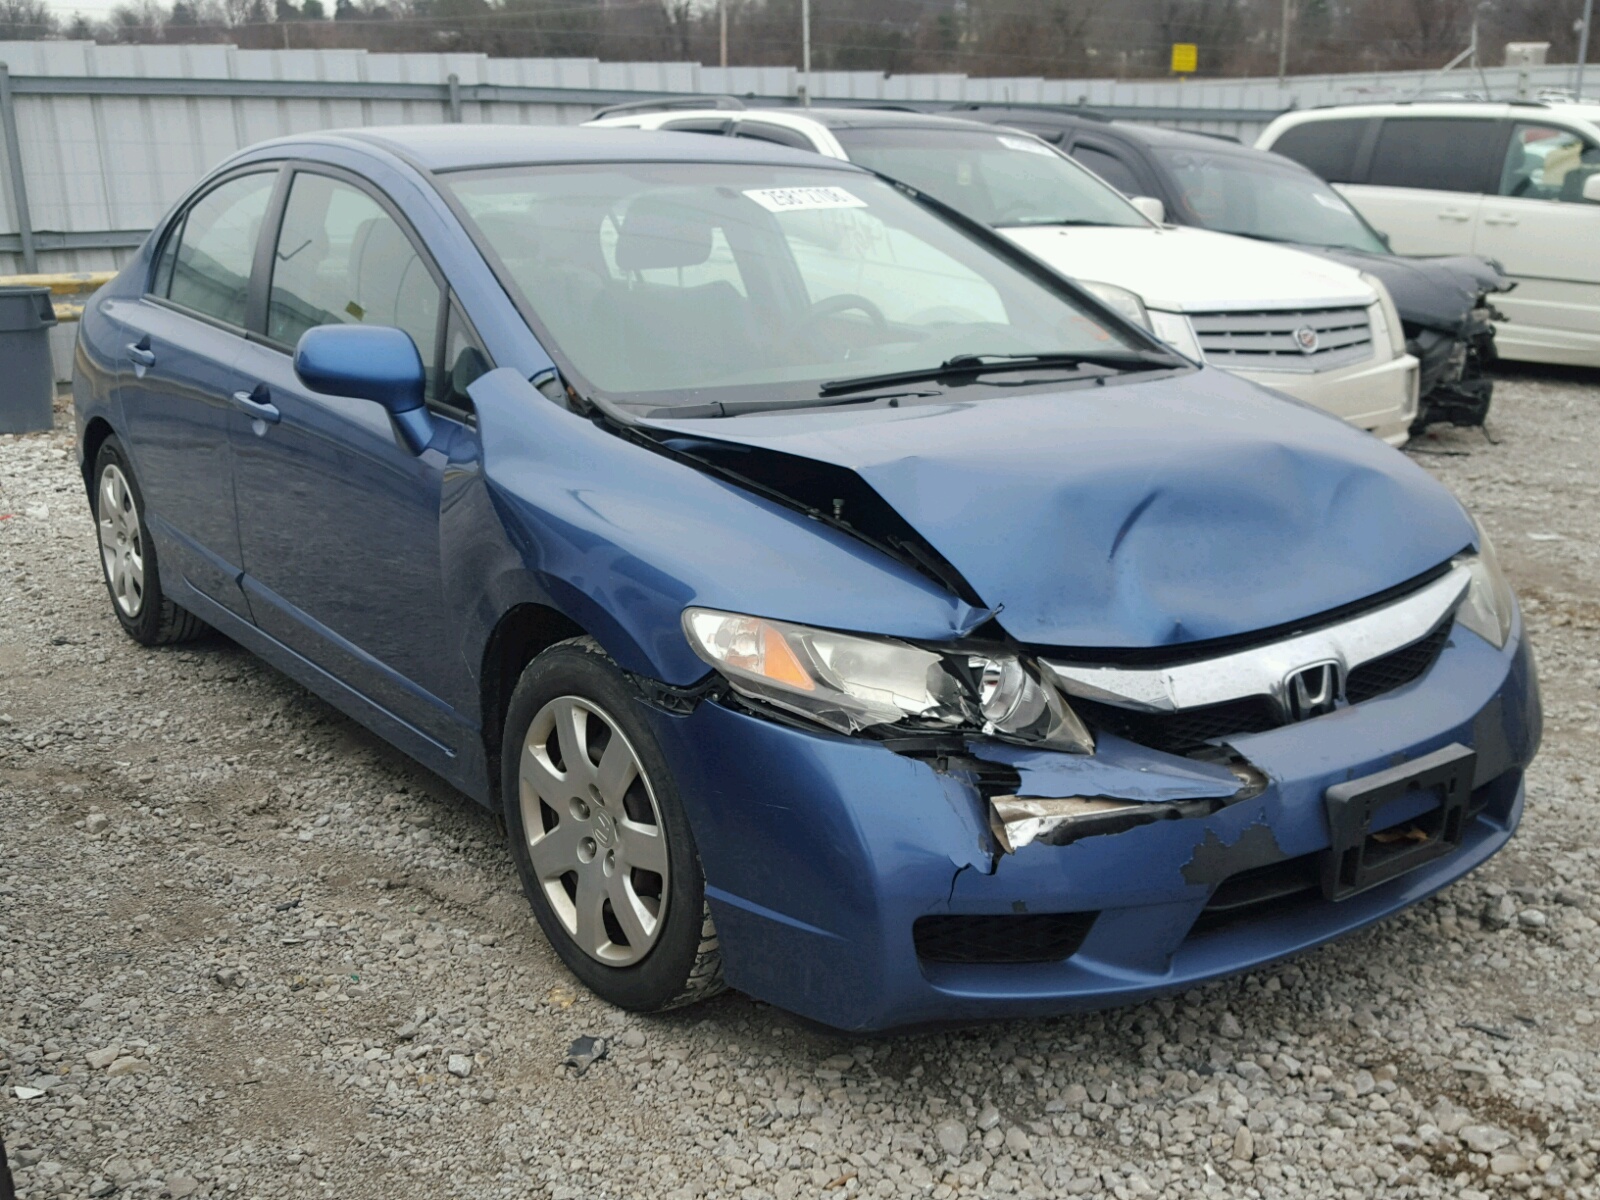 Auto Auction Ended on VIN: 1HGFA16569L011467 2009 HONDA CIVIC LX in KY